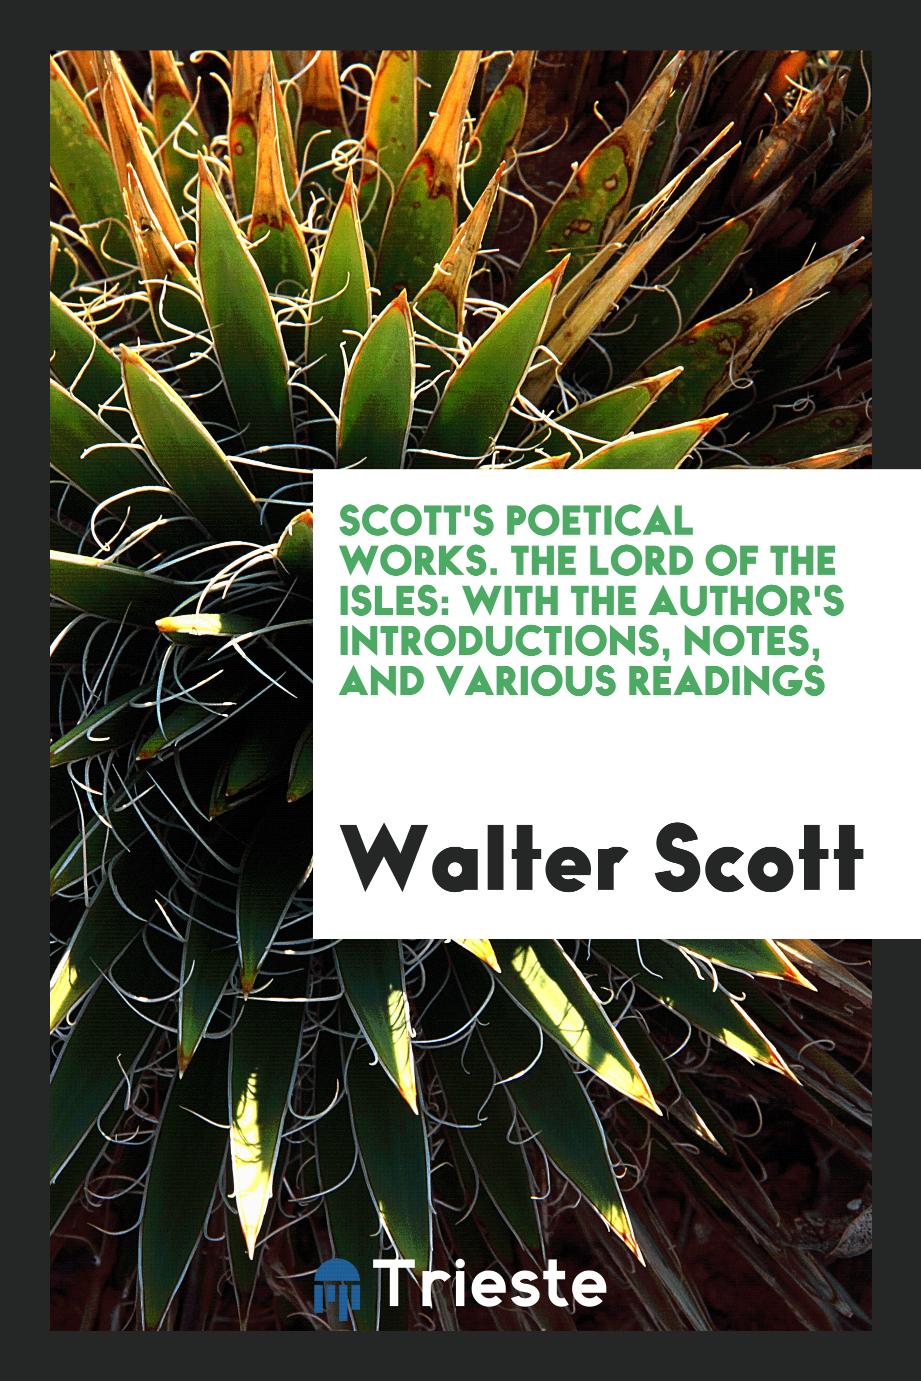 Scott's Poetical Works. The Lord of the Isles: With the Author's Introductions, Notes, and Various Readings